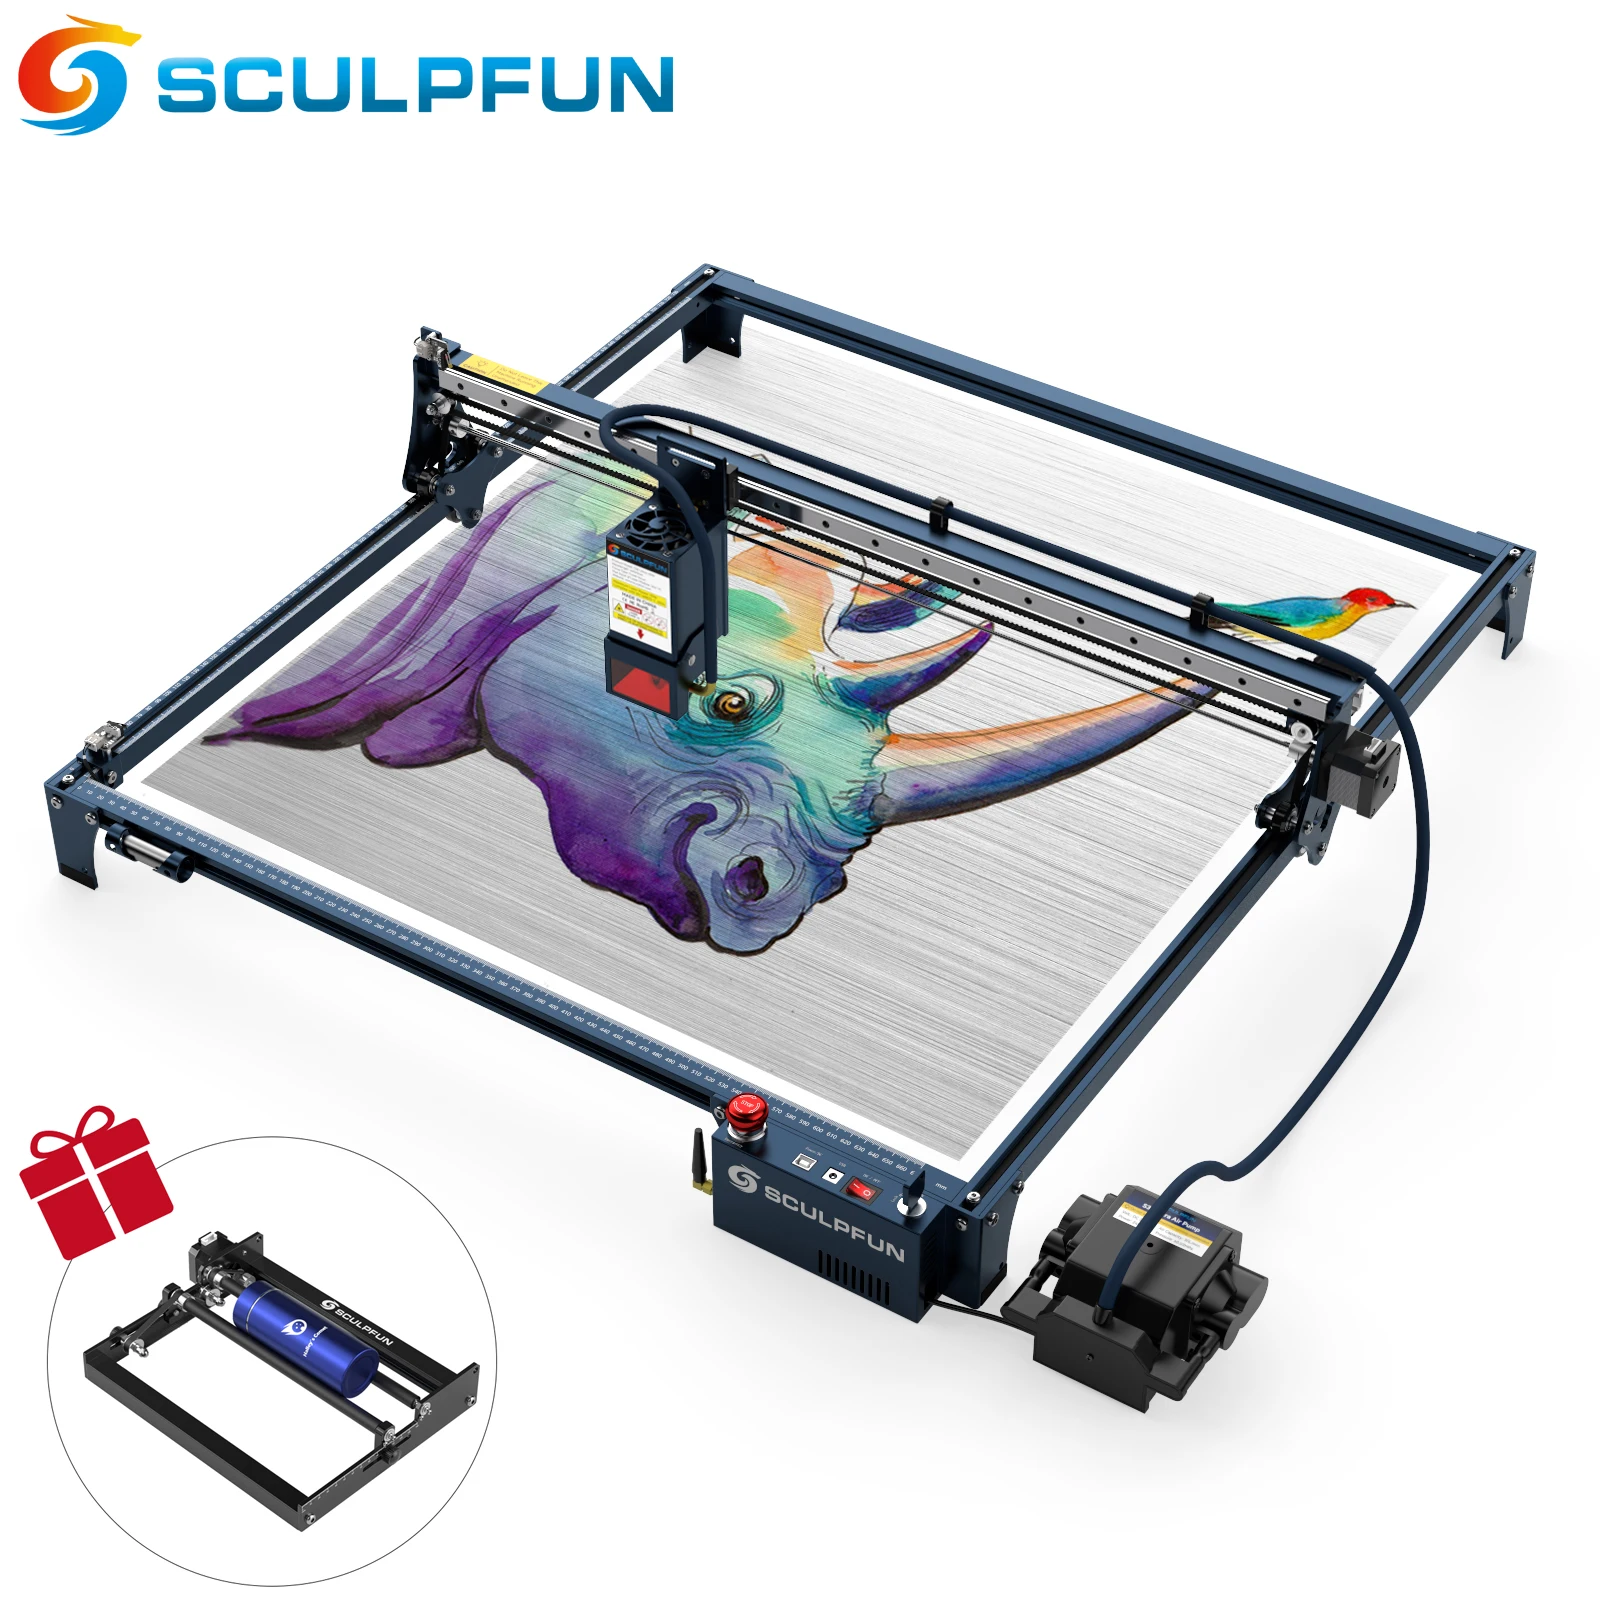 SCULPFUN S30 Ultra 11W 22W 33W Laser Engraving Machine 600x600mm Work Area Laser Cutter Engraver With Replaceable Protective Len 5j jee05 001 replaceable lamp with generic housing for benq projector ht2050 w1110 w2000 ht2050 ht3050 ht2150st w1210st